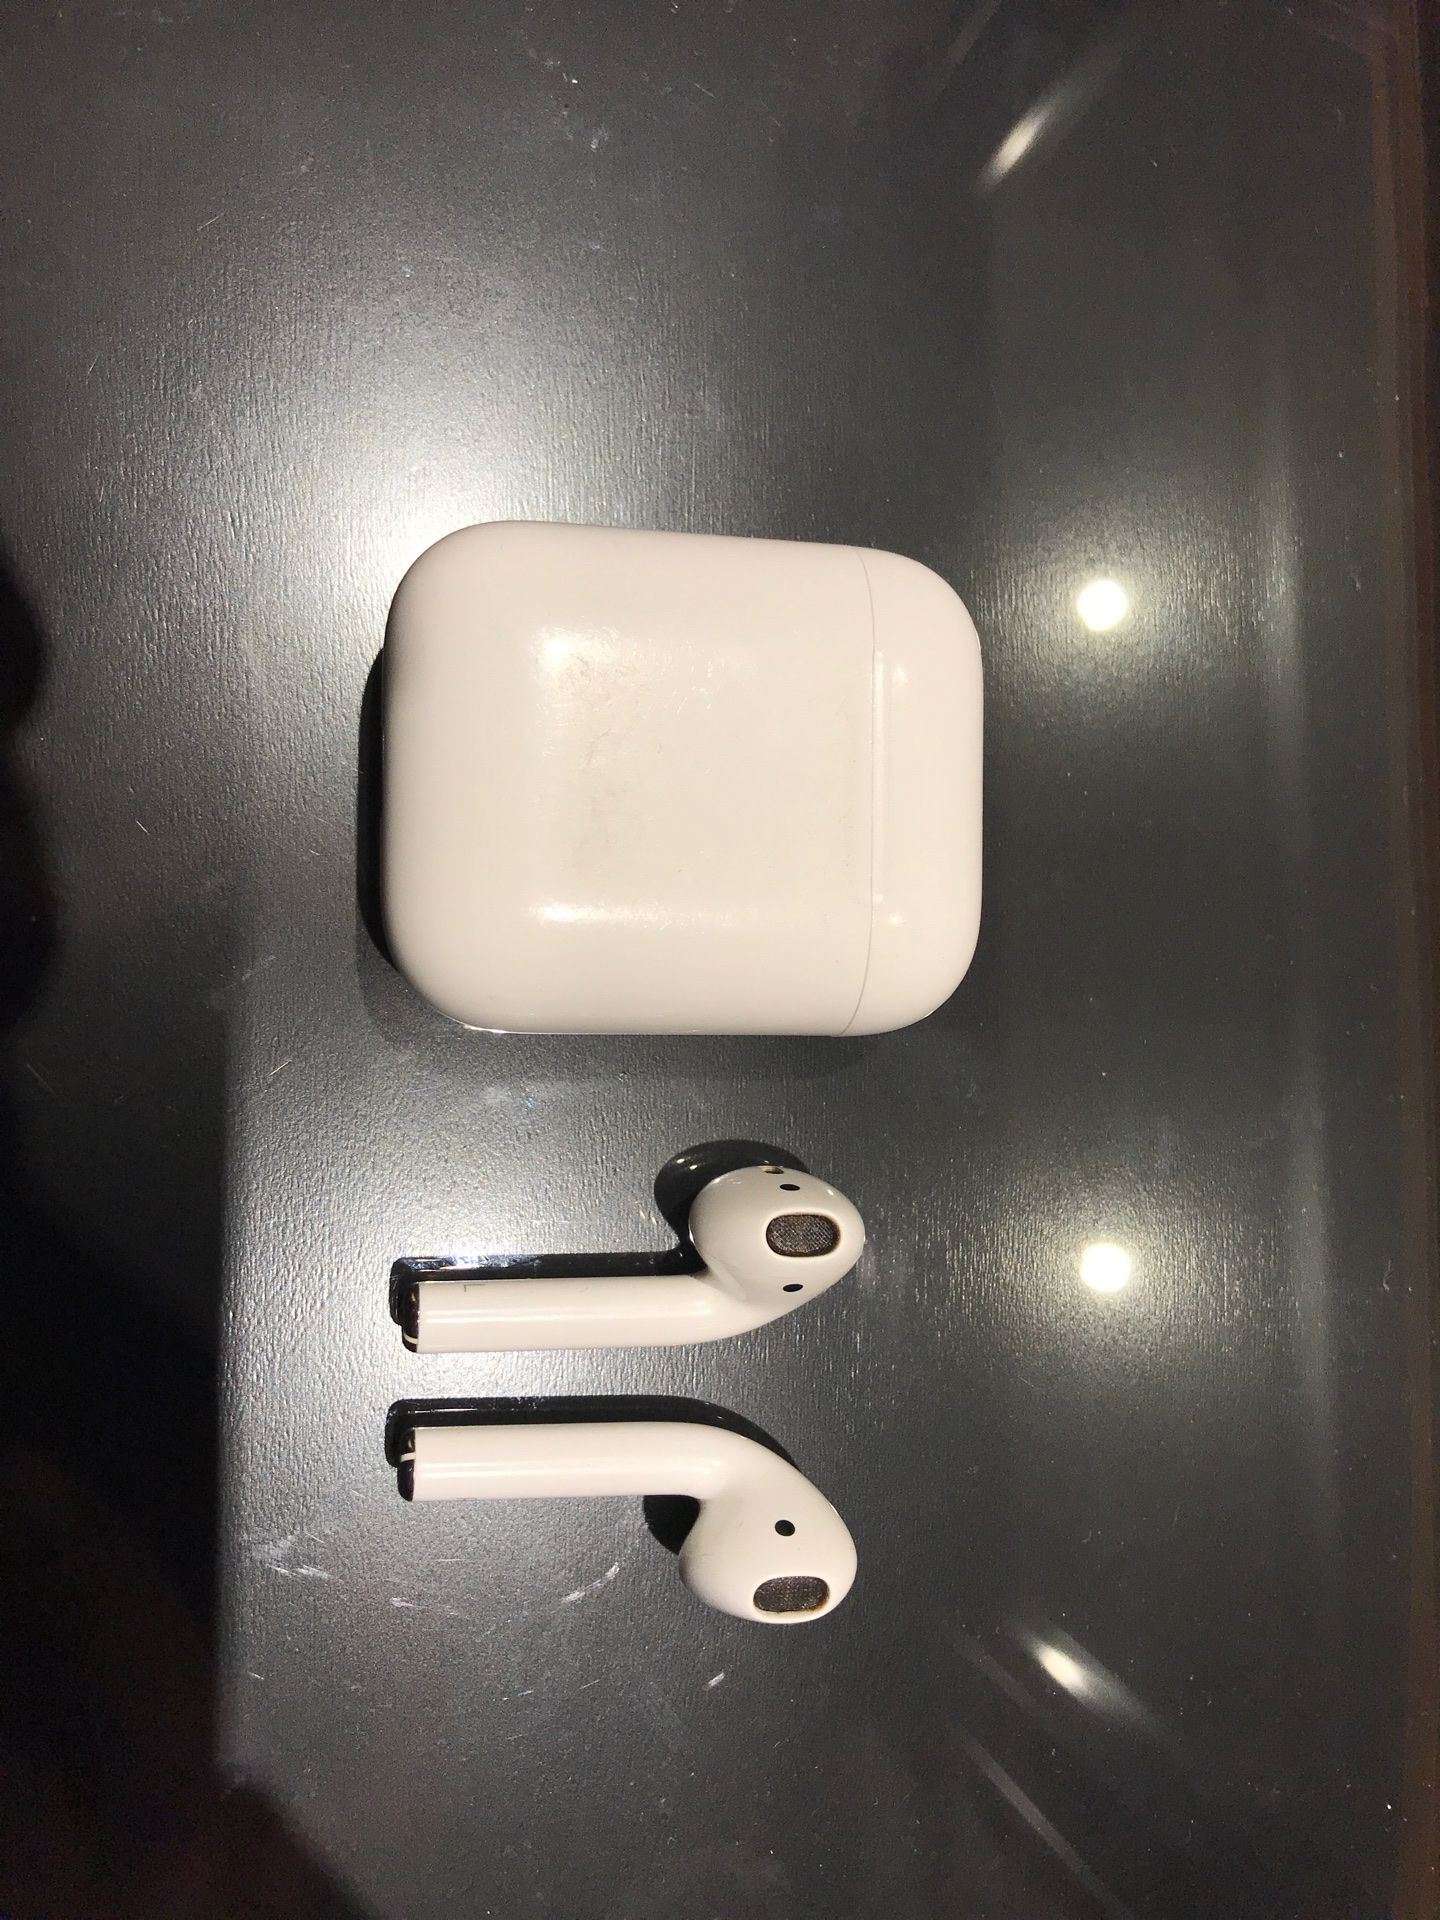 AirPods 1 generation